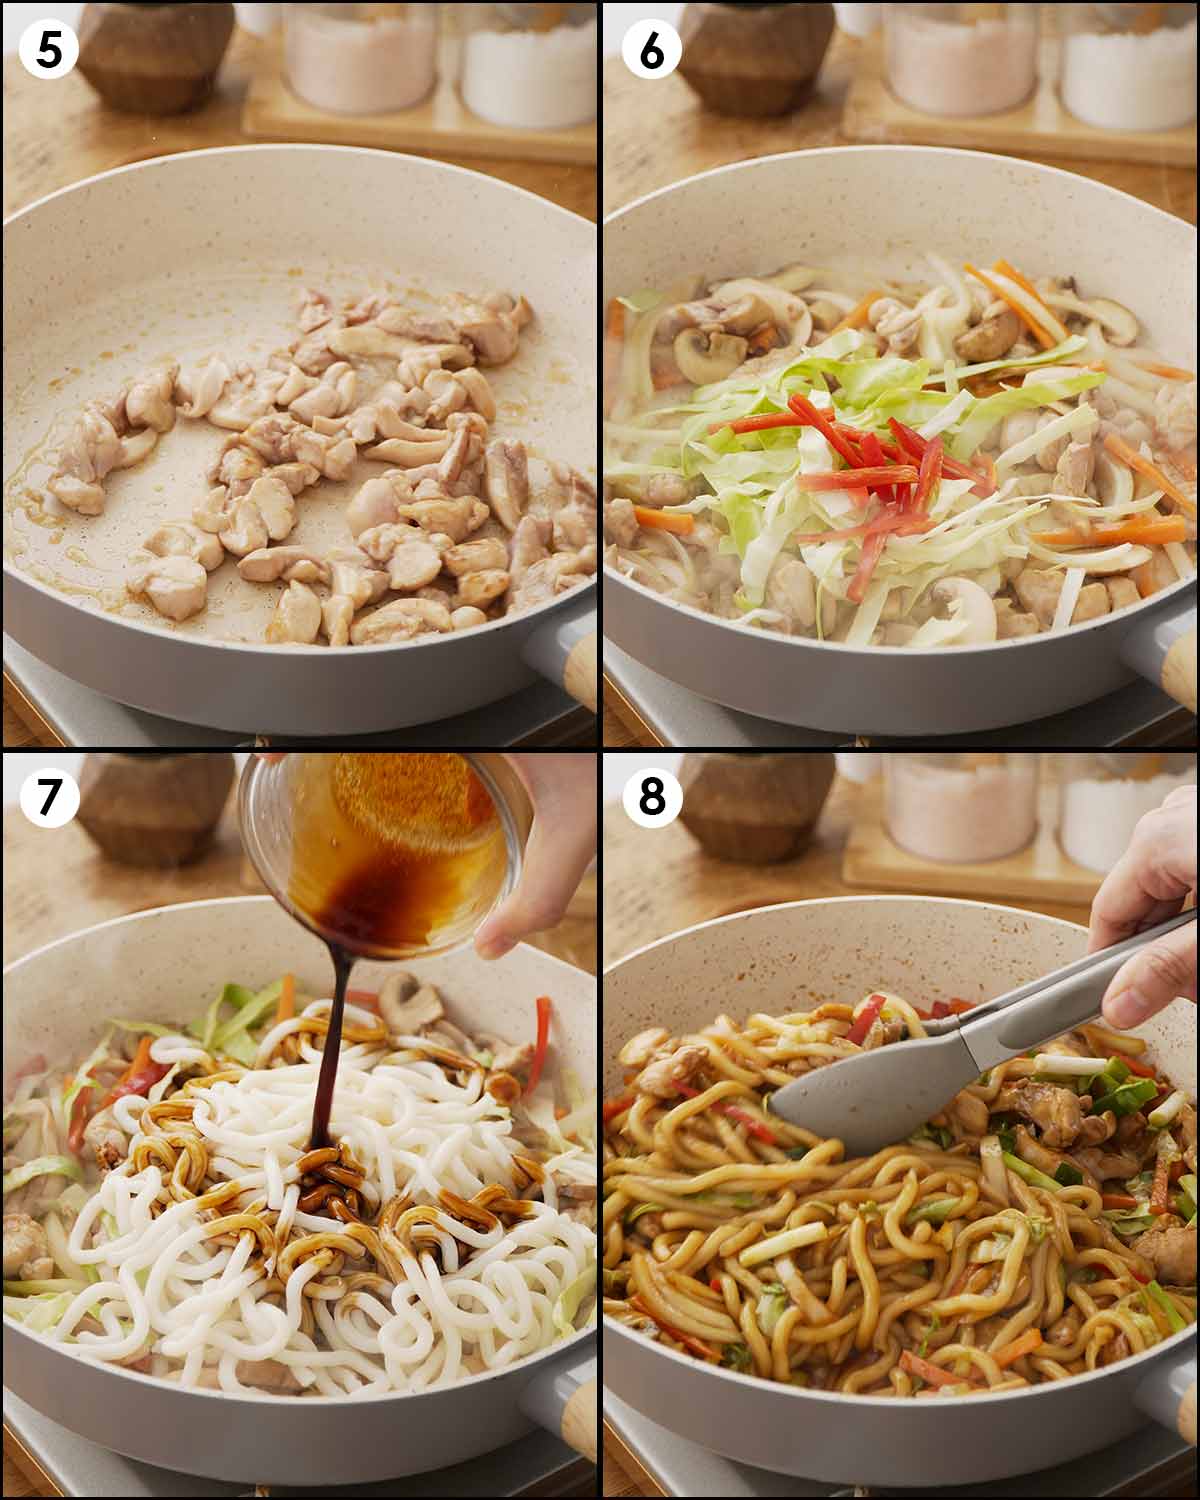 4 image collage showing how to stir fry chicken, vegetables, and udon noodles. 